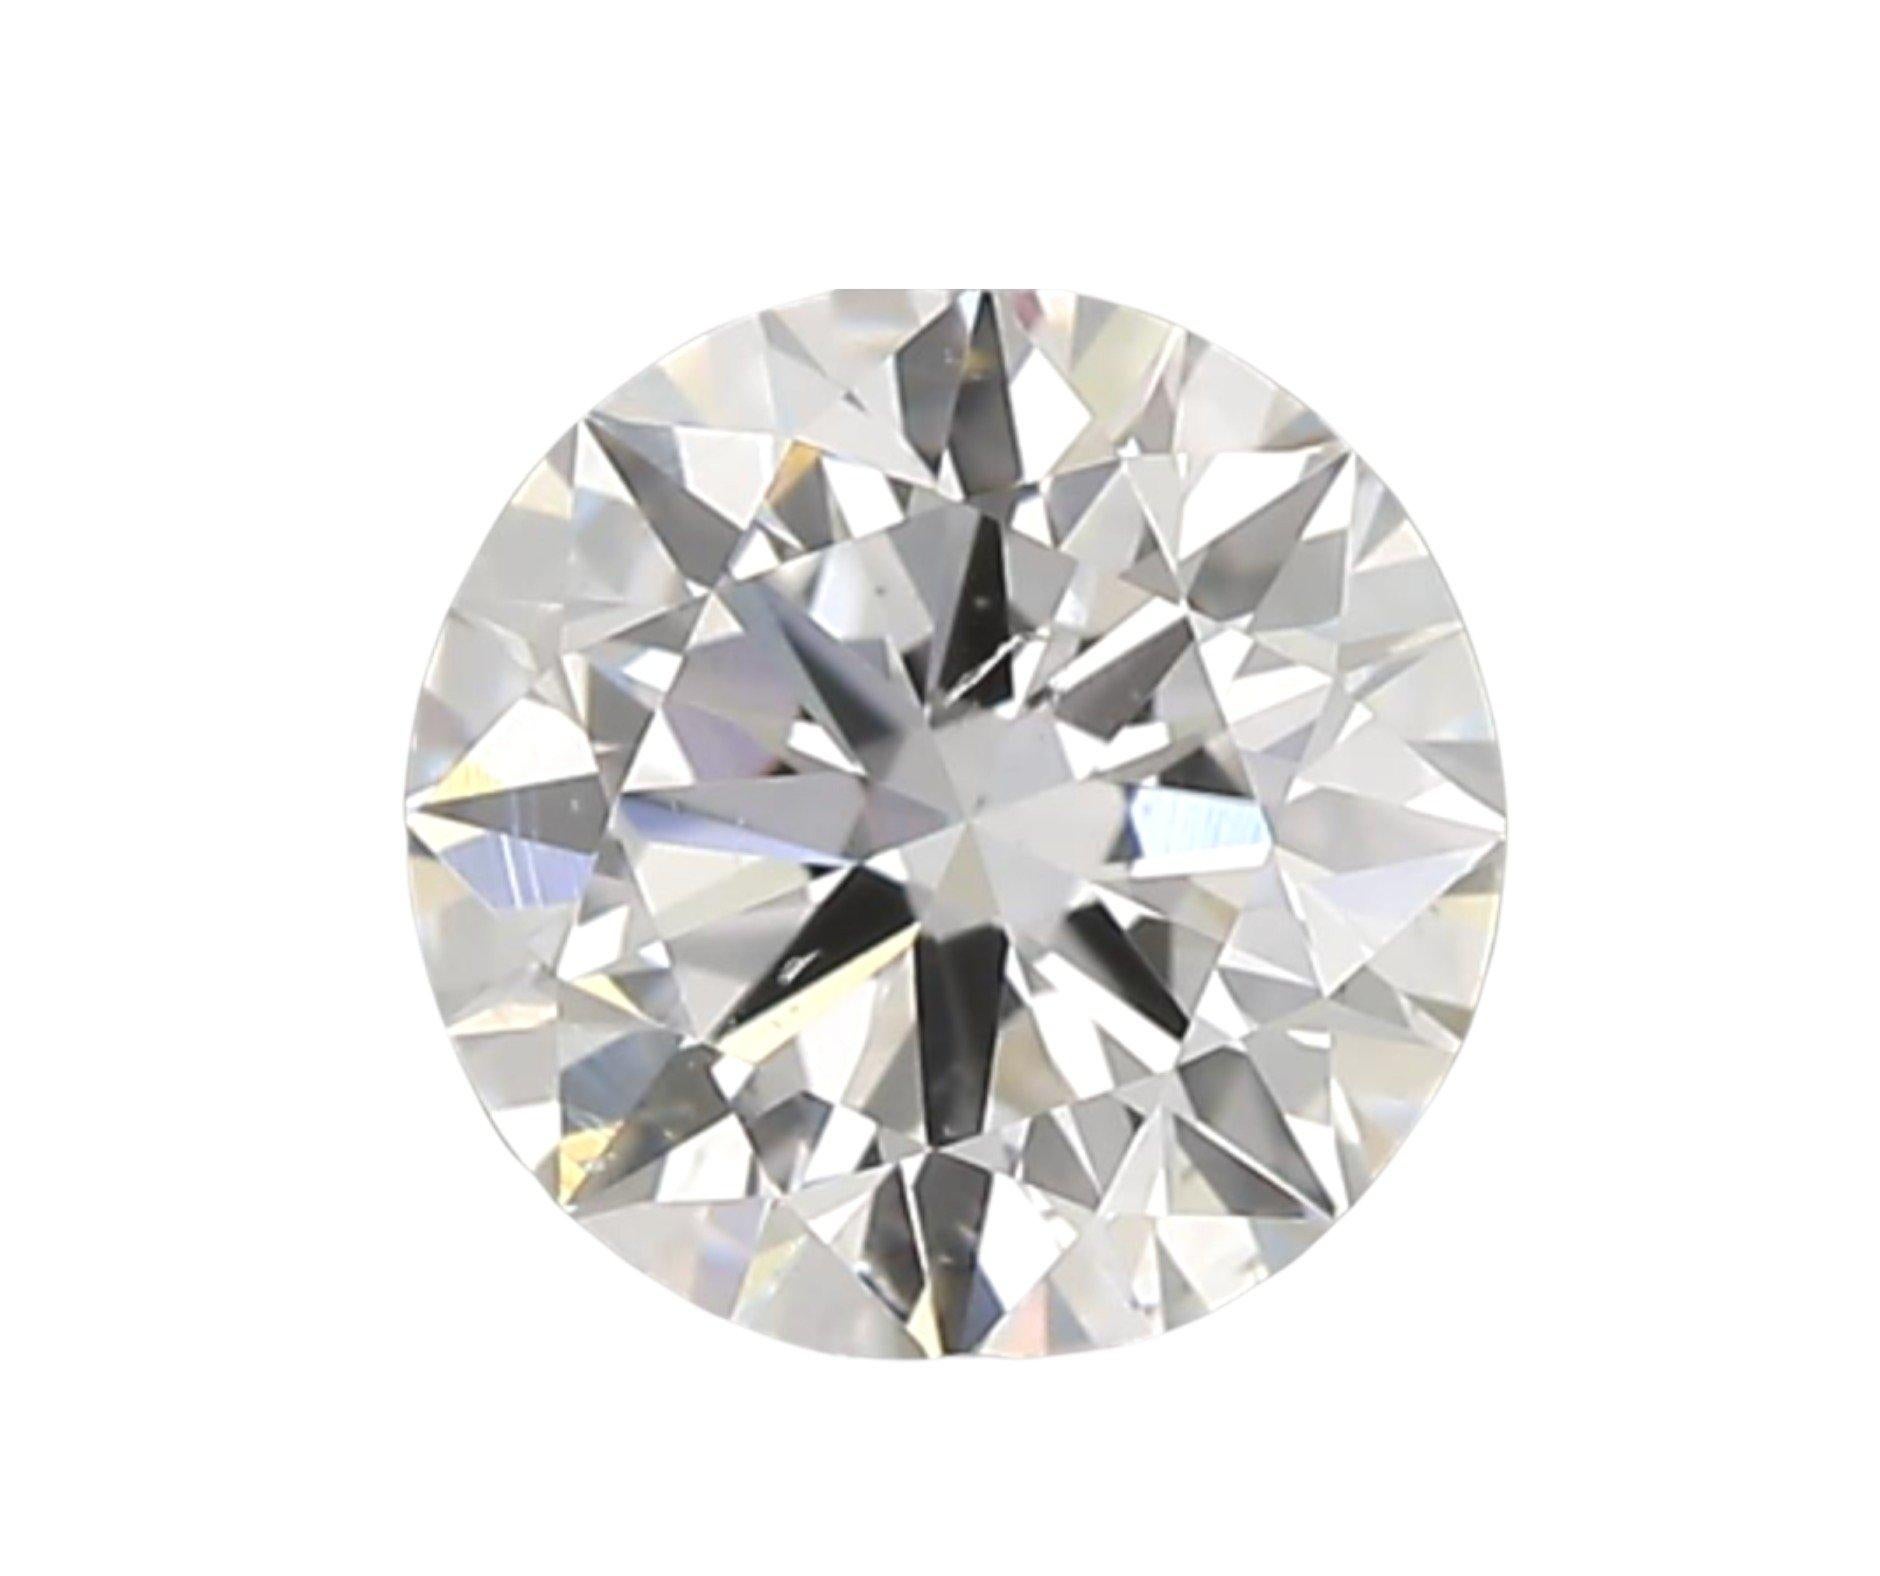 Natural round brilliant diamond in a 0.33 carat F SI1 graded by IGI Laboratory with beautiful cut and shine. This diamond comes with an IGI Certificate sealed in a security blister and laser inscription number.

IGI 534256523

Sku: 155717-3